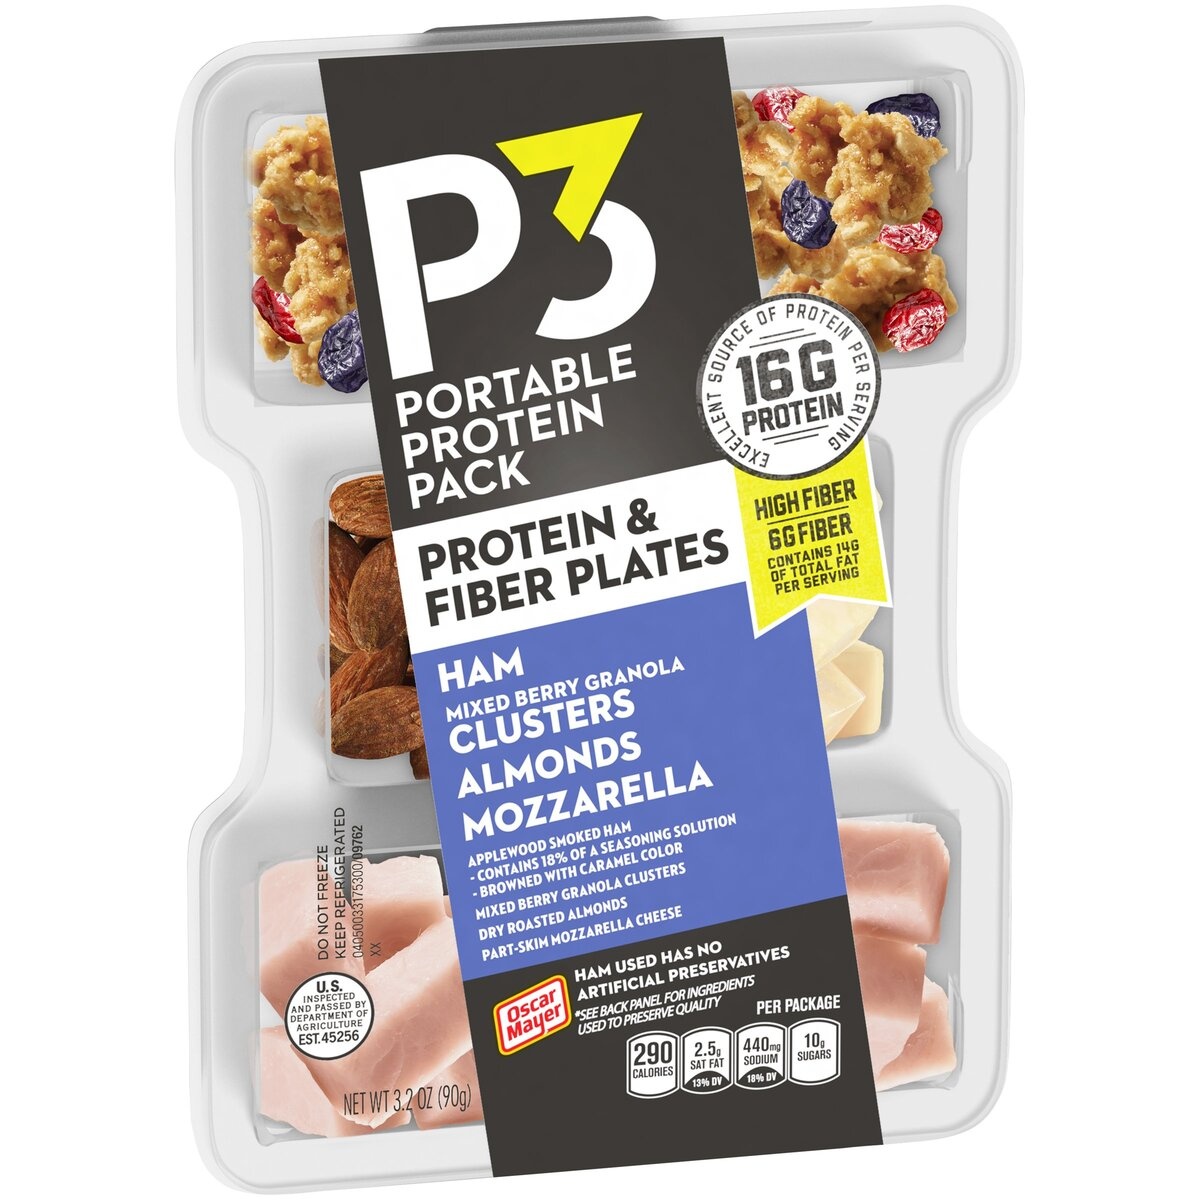 slide 2 of 8, P3 Portable Protein Snack Pack & Fiber Plate with Ham, Mixed Berry Granola Clusters, Almonds & Mozzarella Cheese Tray, 3.2 oz